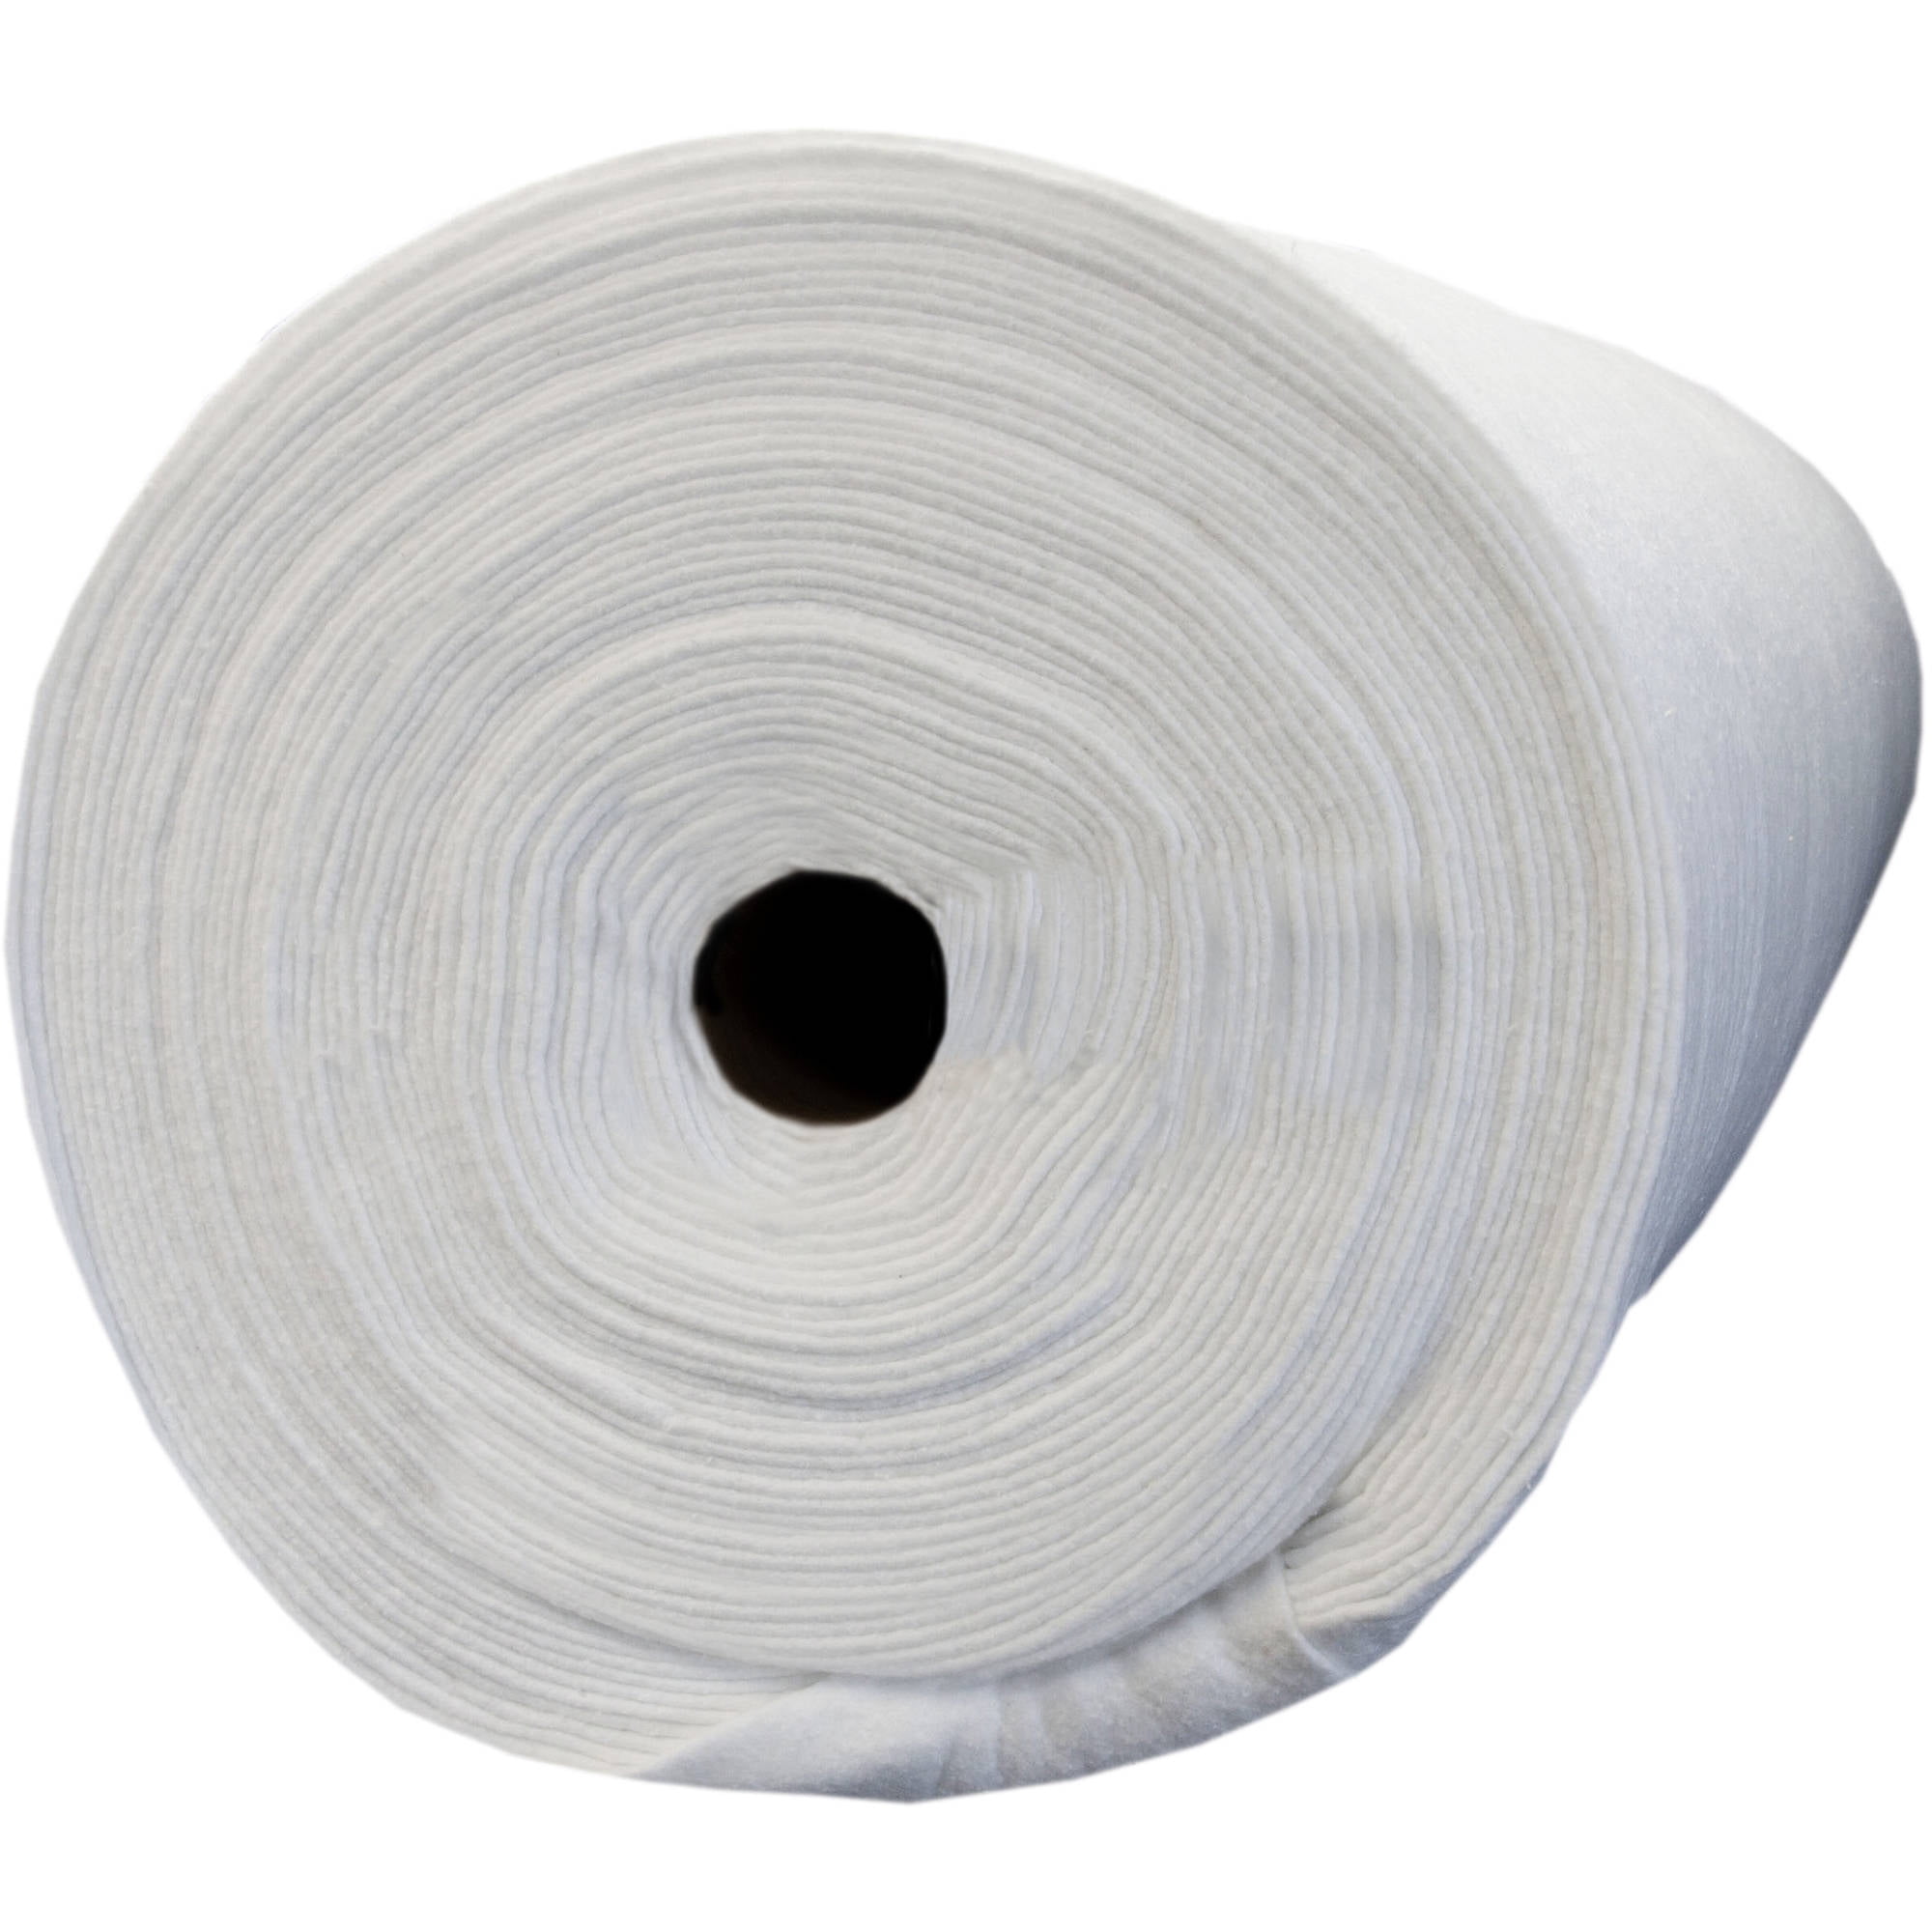 Pellon Natures Touch 100 Percent White Cotton Batting with Scrim, 96 Wide, 30 Yard Roll